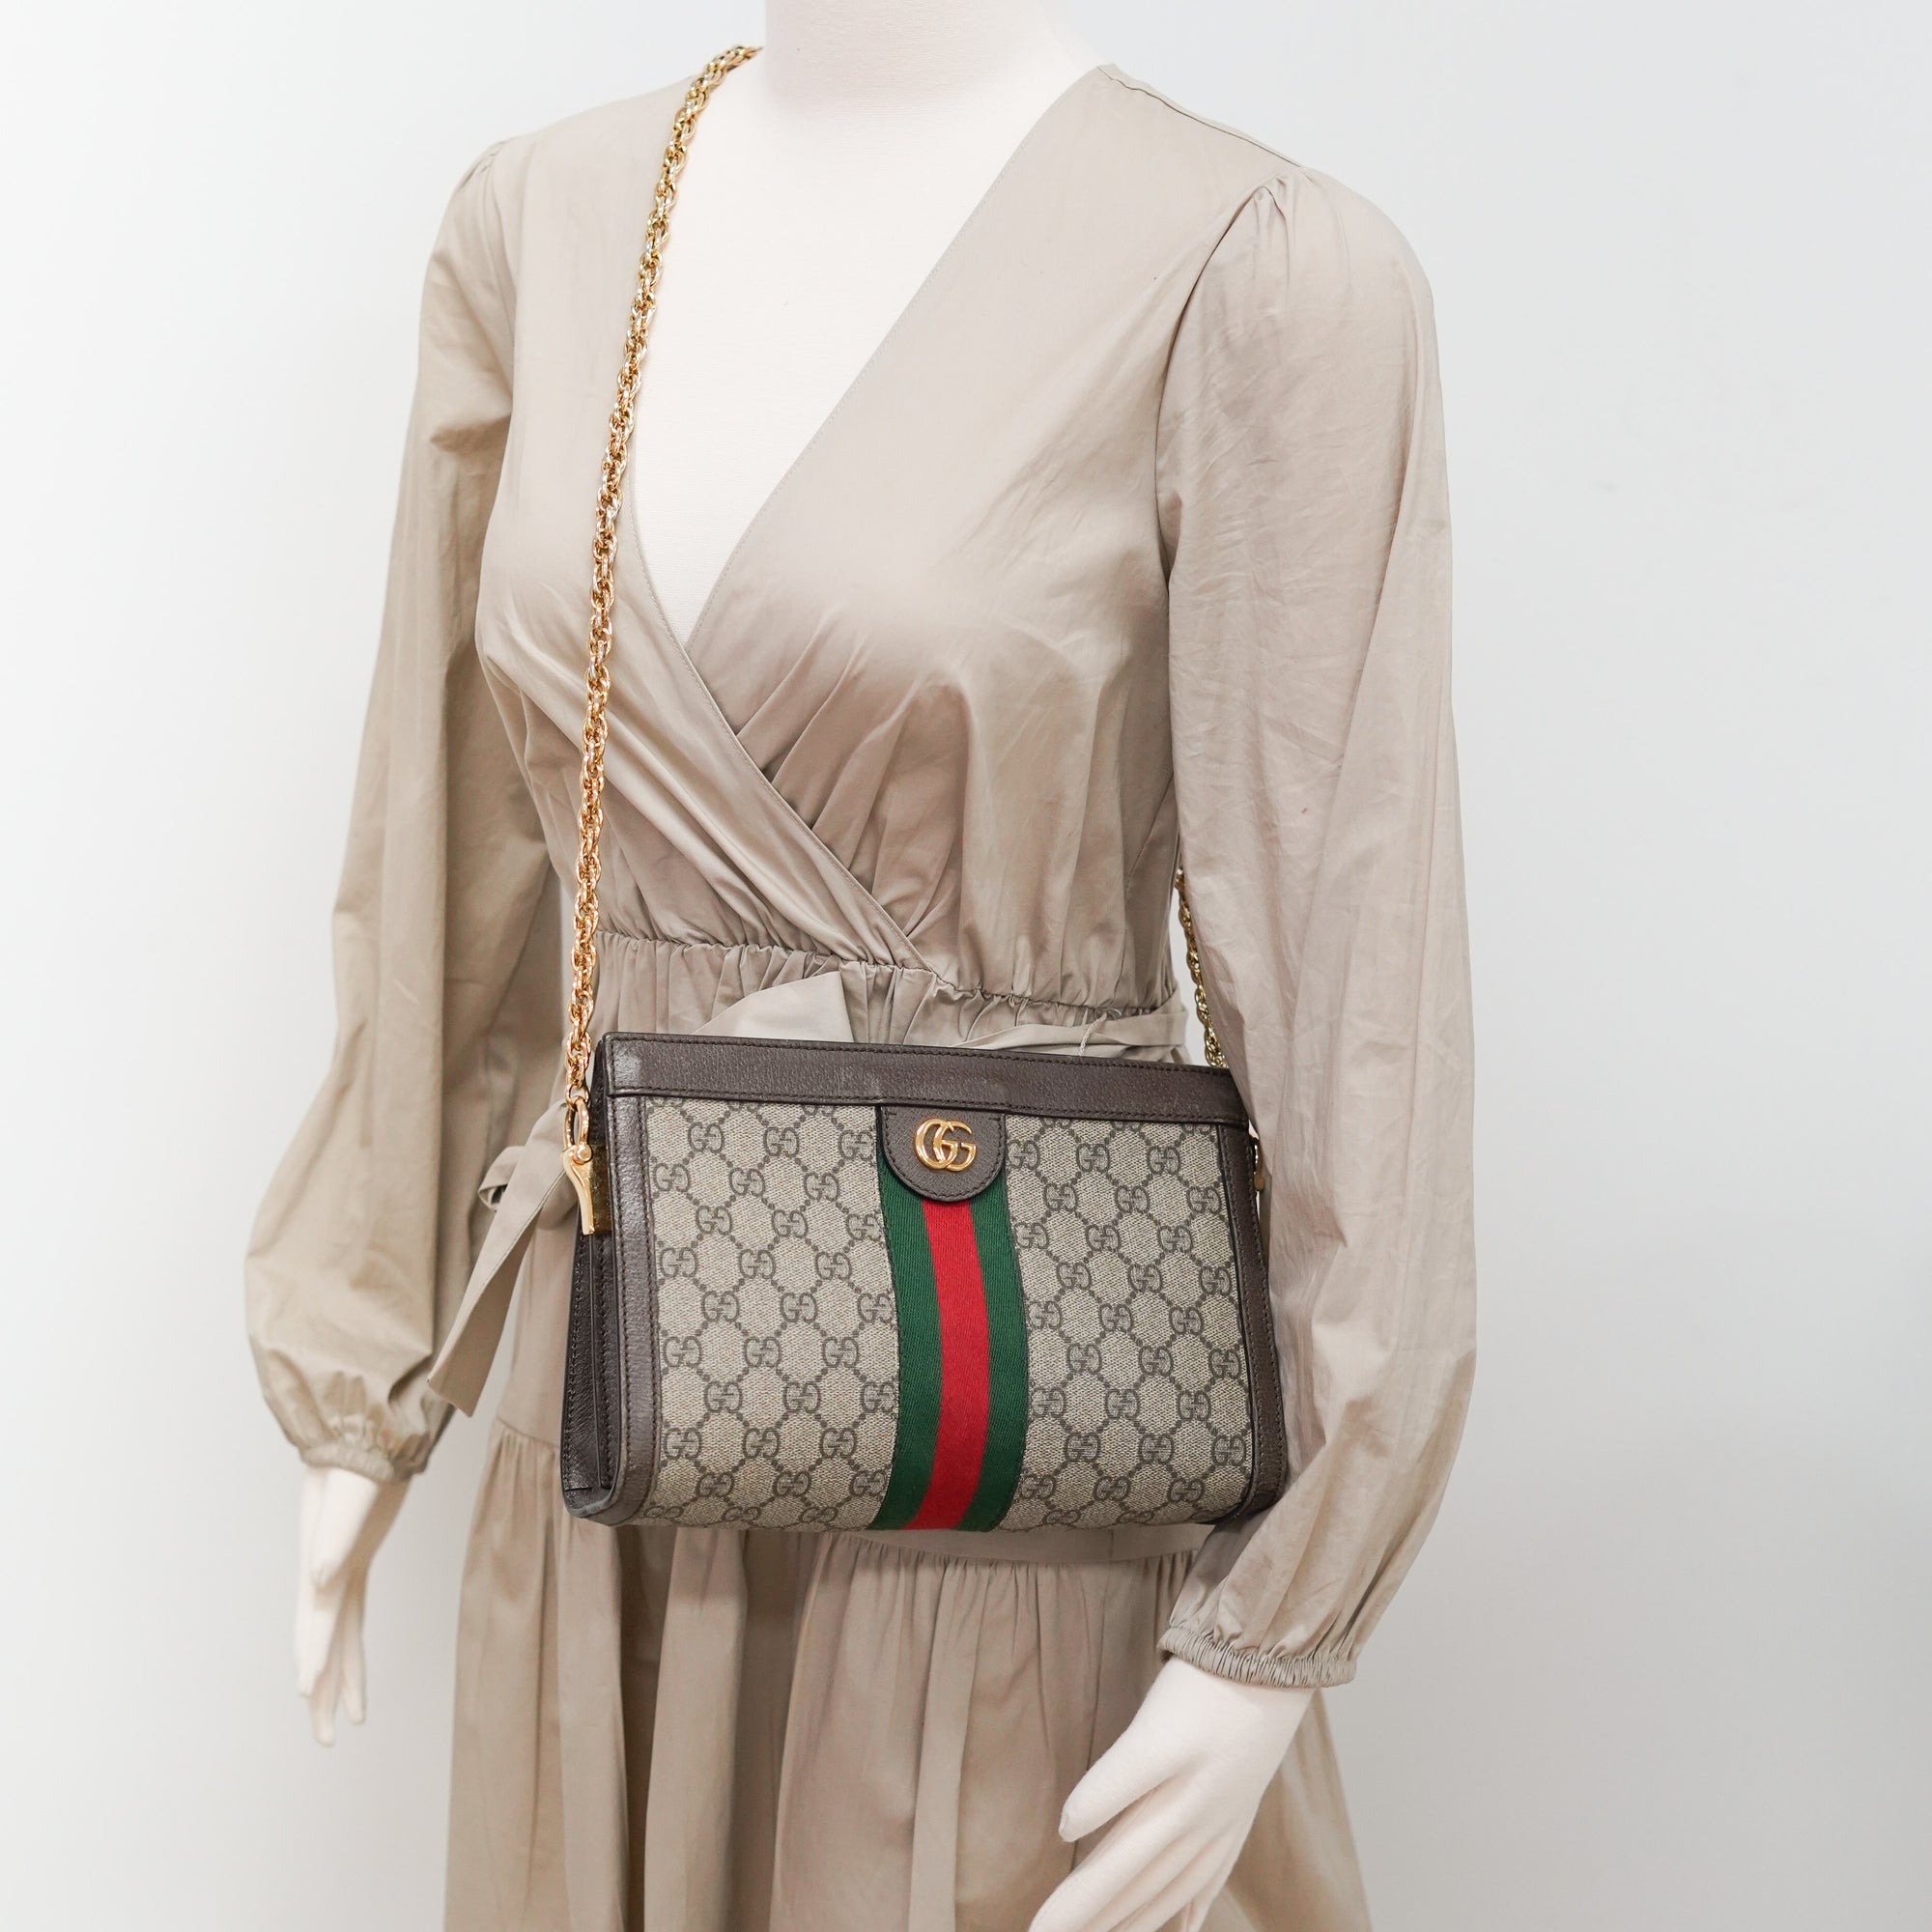 Gucci Ophidia Small Shoulder Bag - THE PURSE AFFAIR